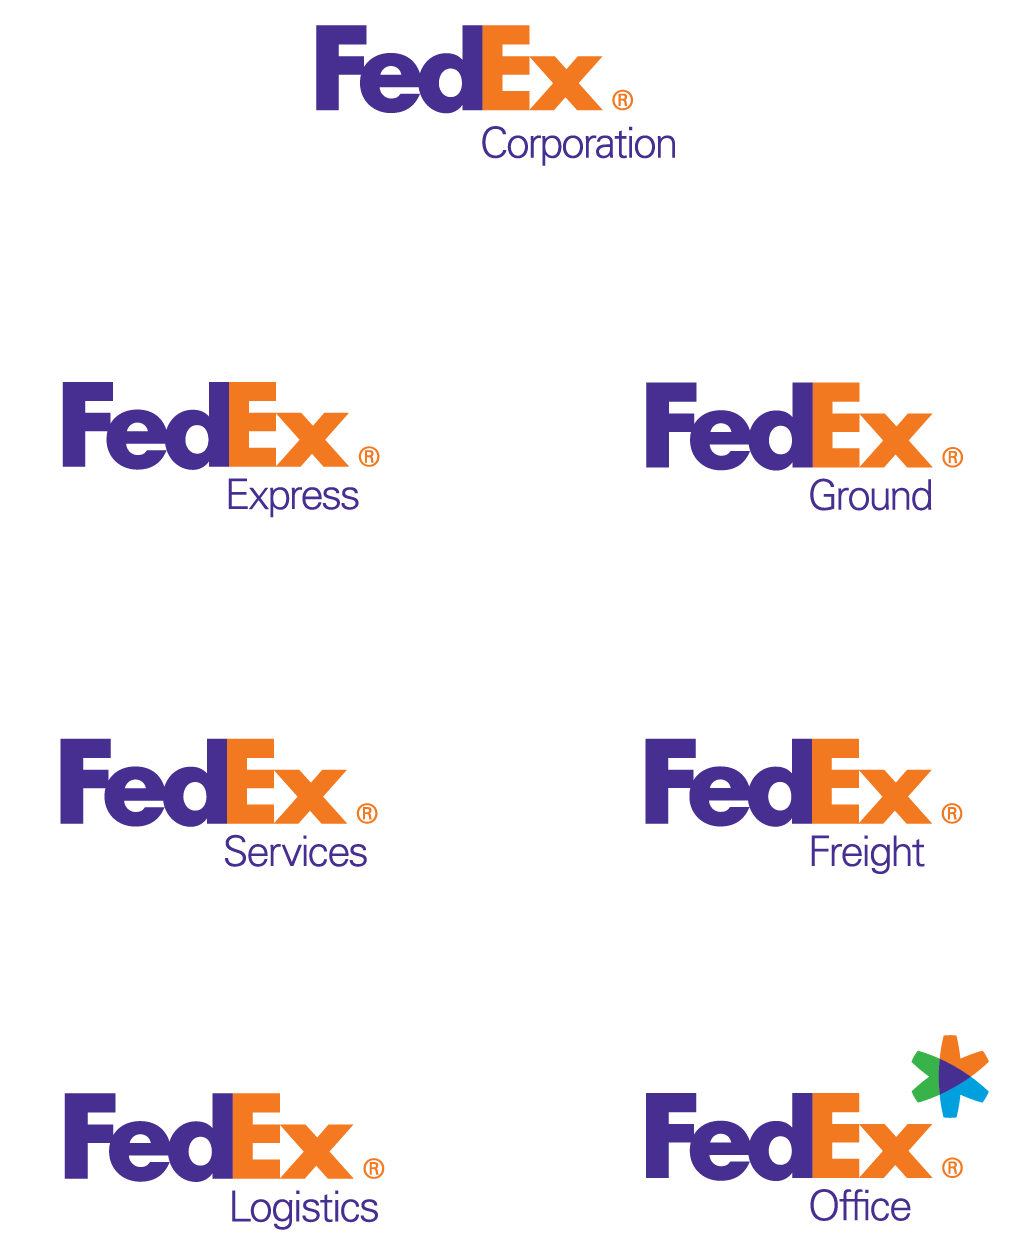 FedEx Services Logo - Company Structure and Facts - About FedEx